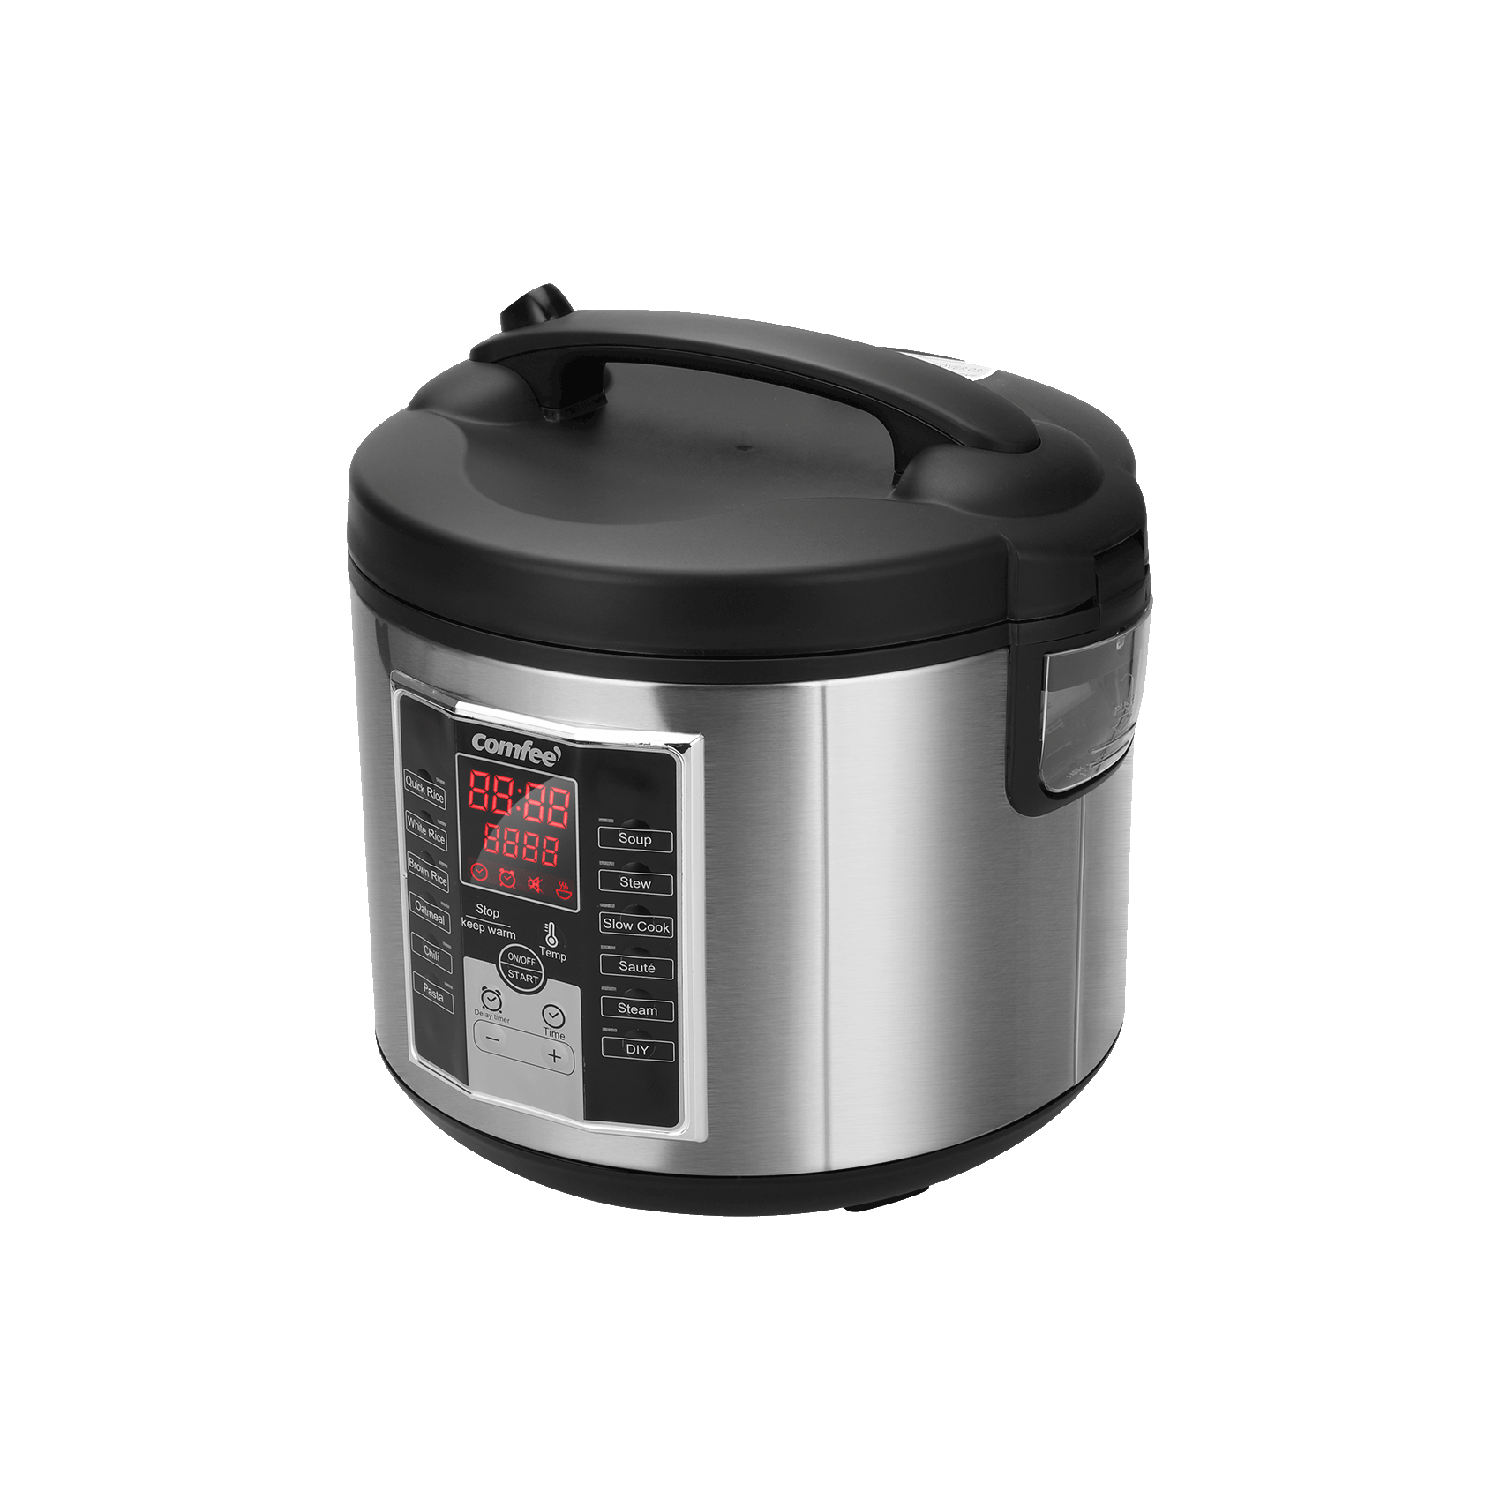 COMFEE' Rice Cooker 10 cup uncooked, Food  